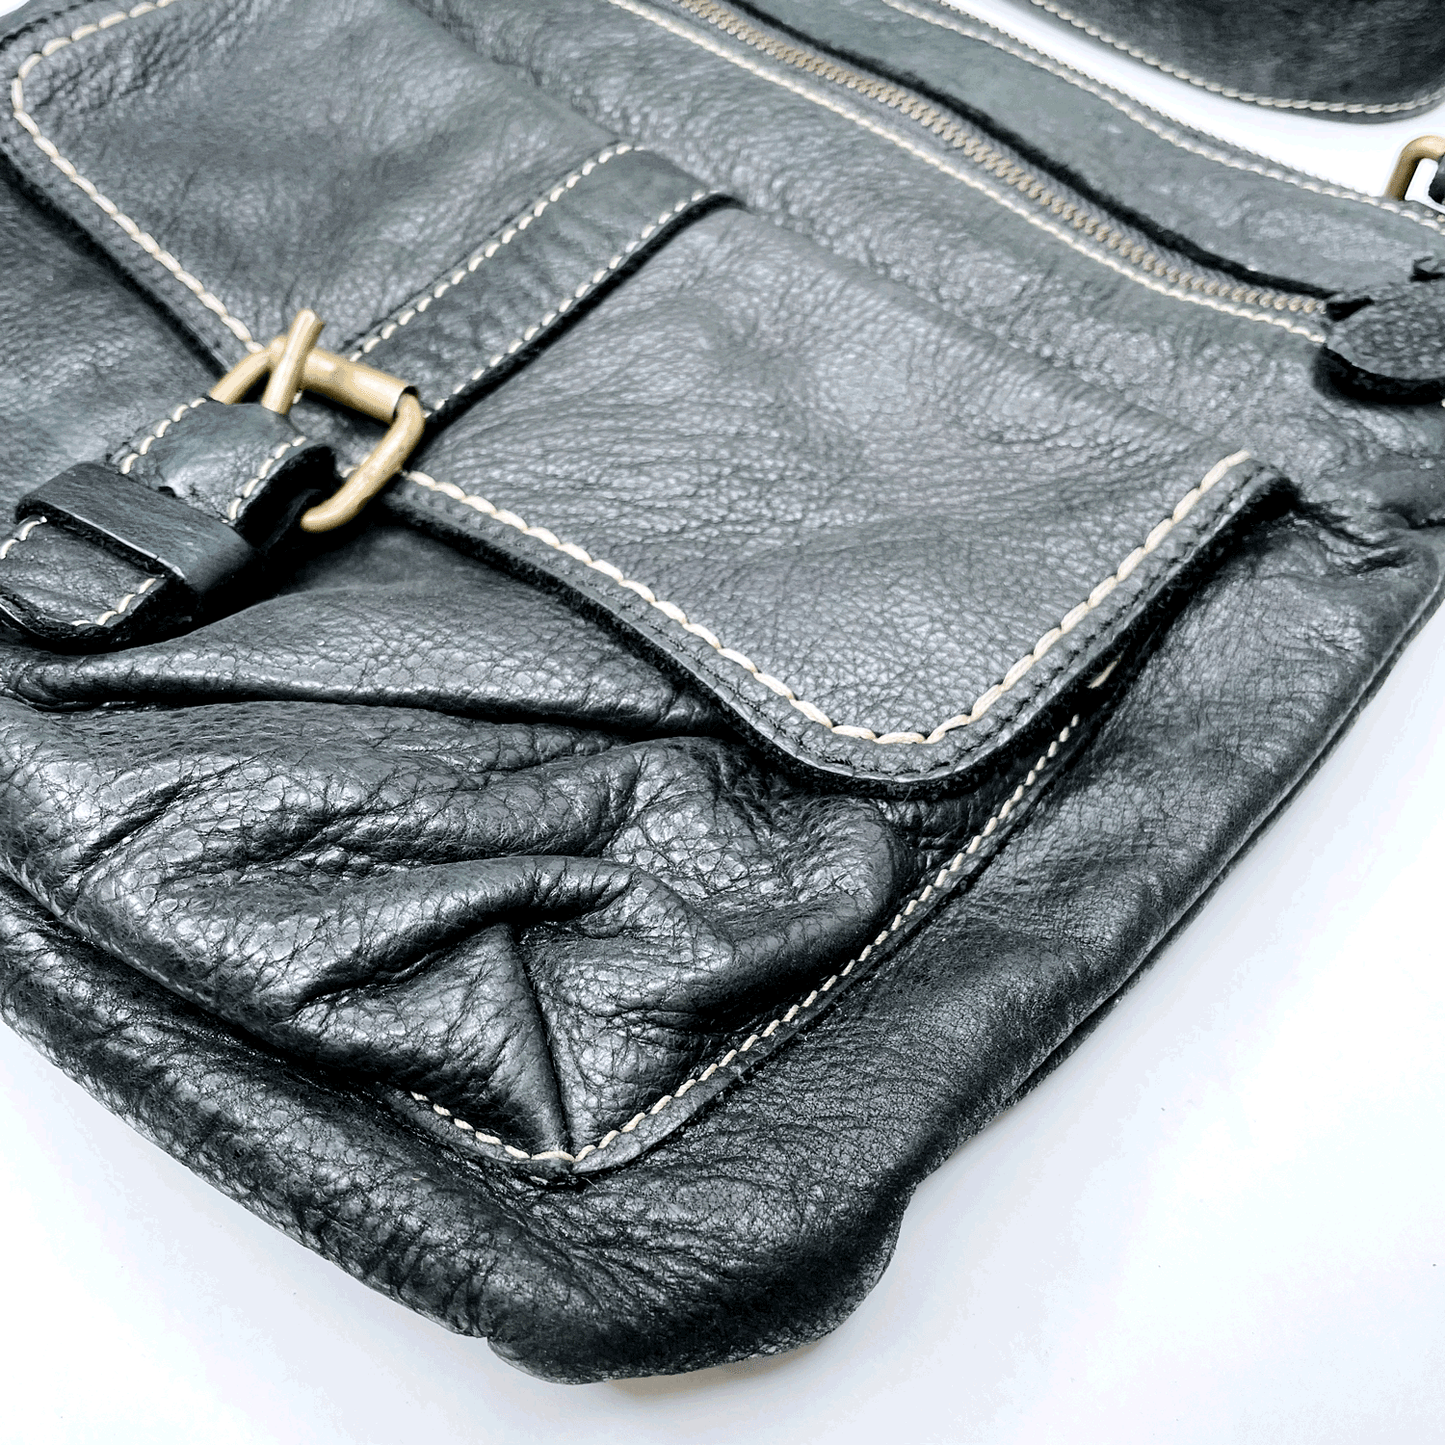 roots tribe crossbody pebbled leather bag